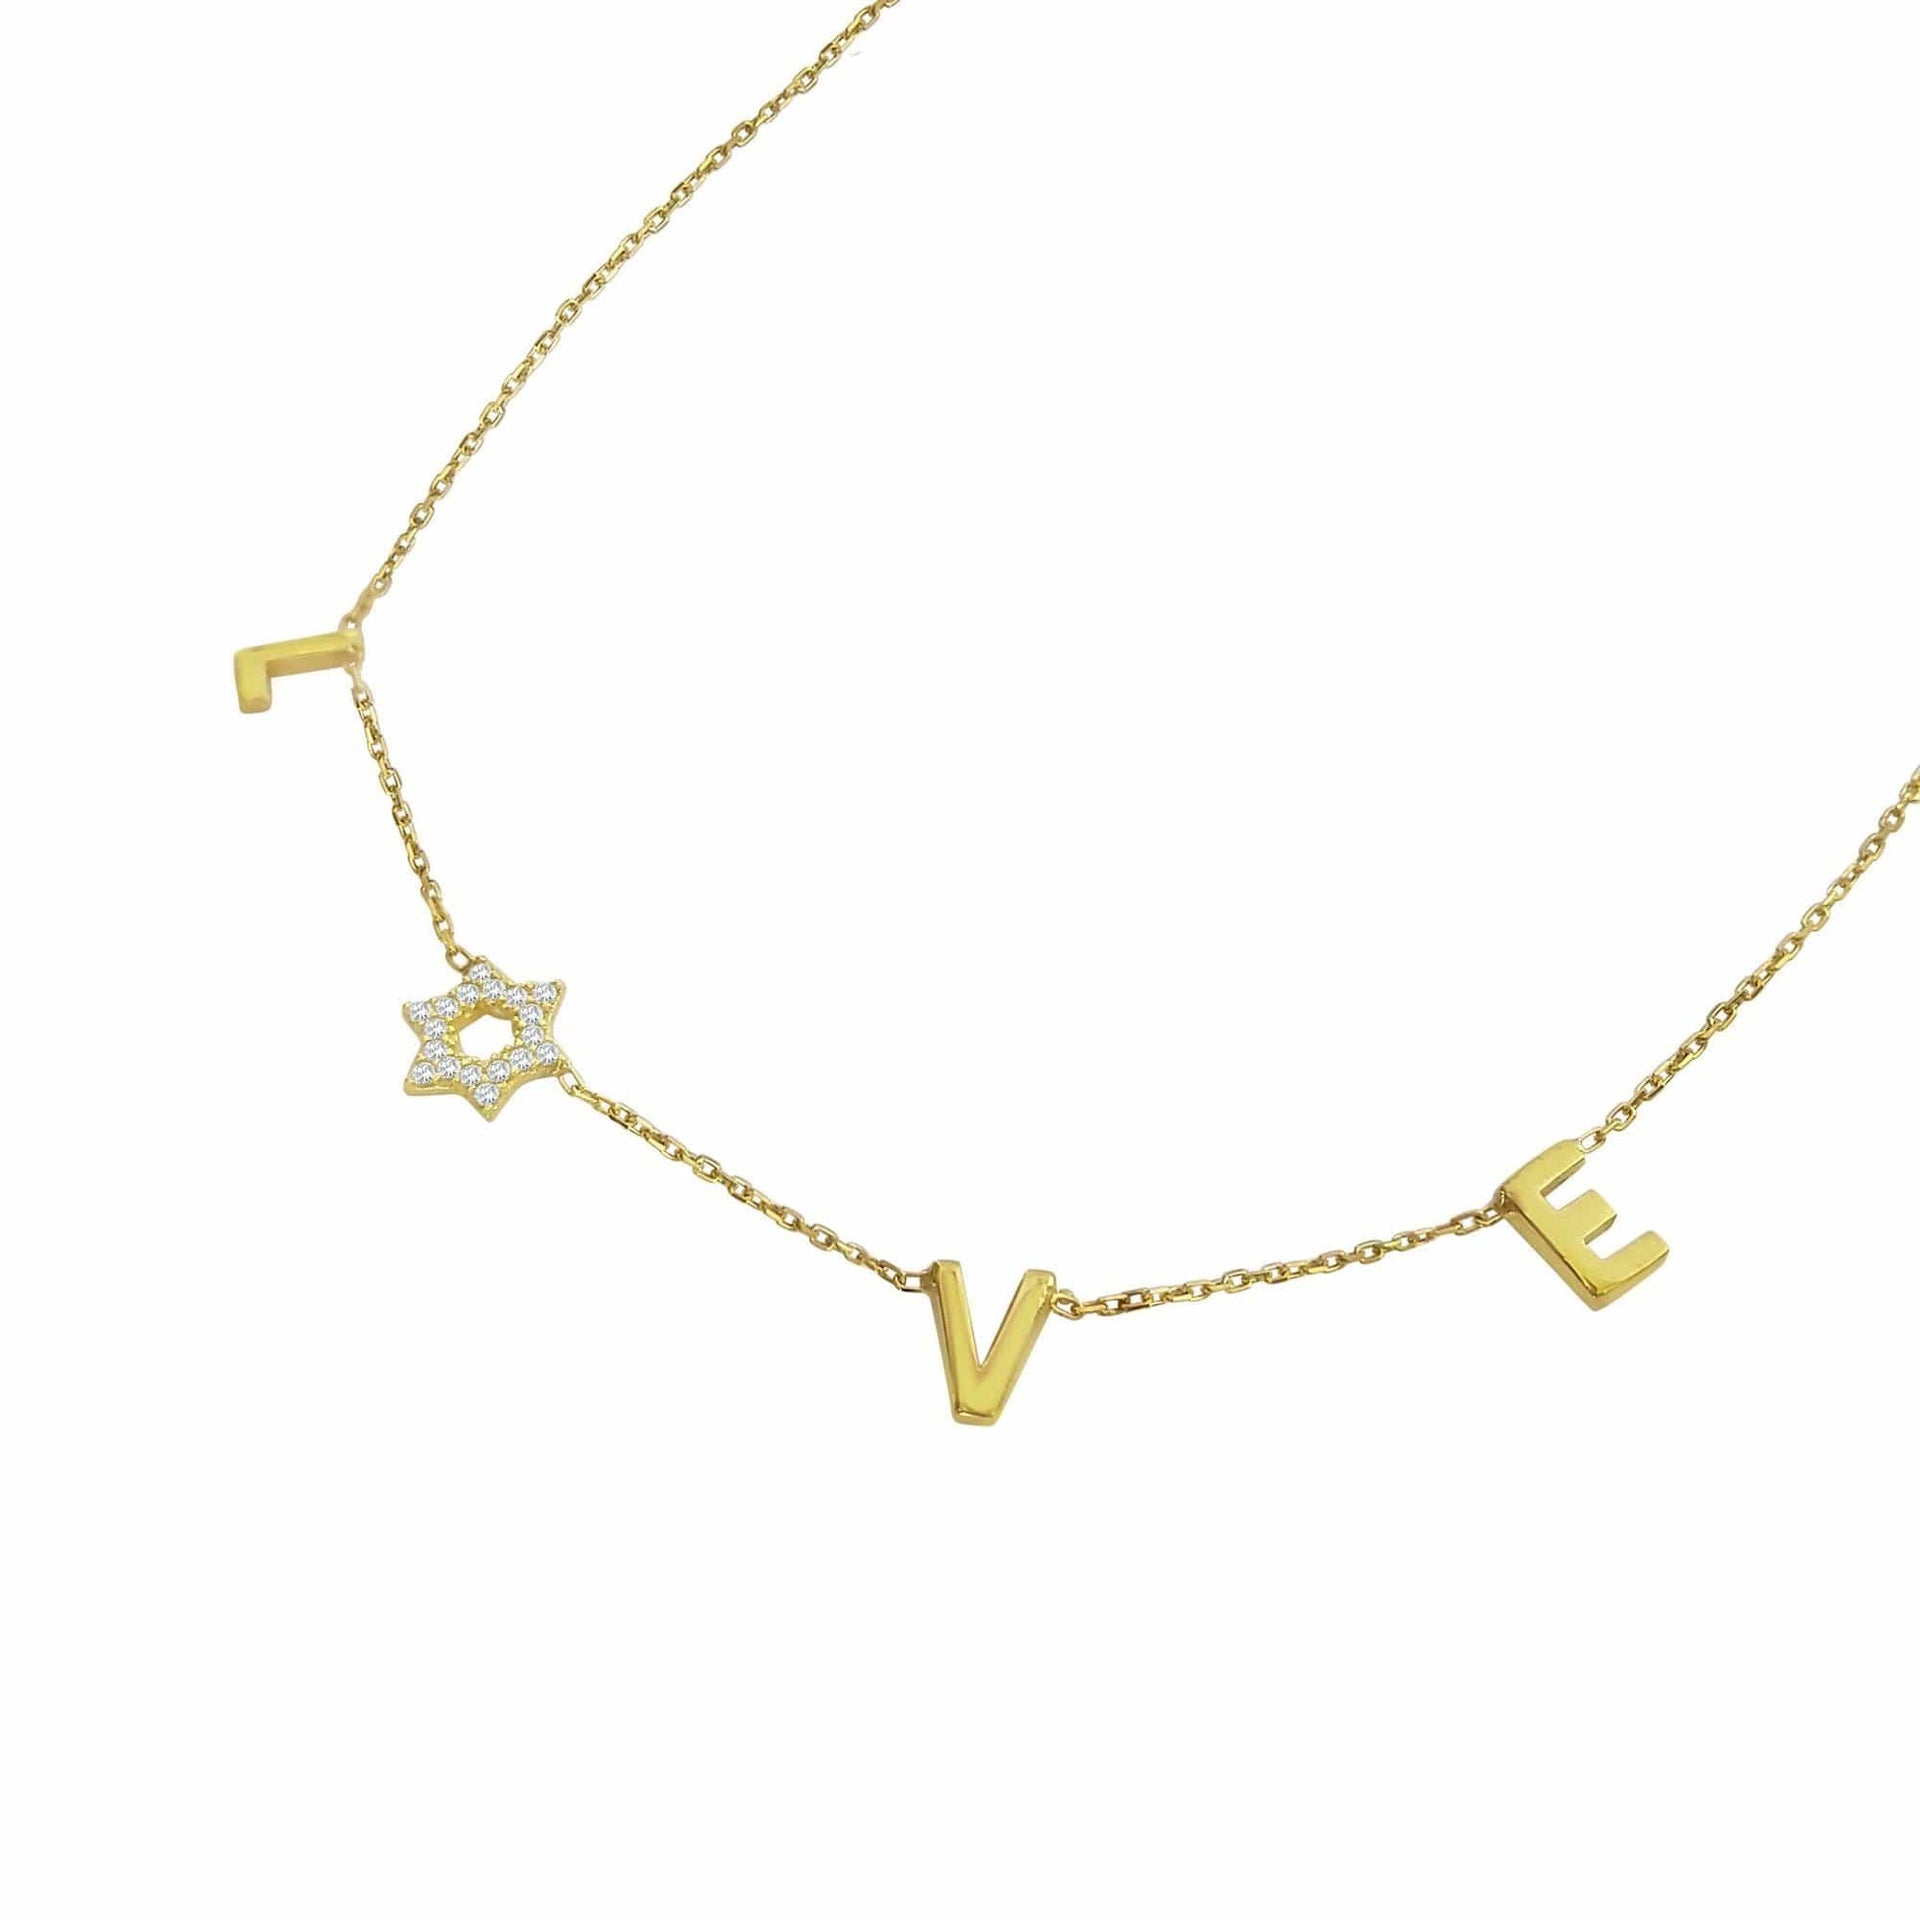 Alef Bet Necklaces Love Necklace in 14k Gold with Diamond Star of David - White Gold, Gold or Rose Gold